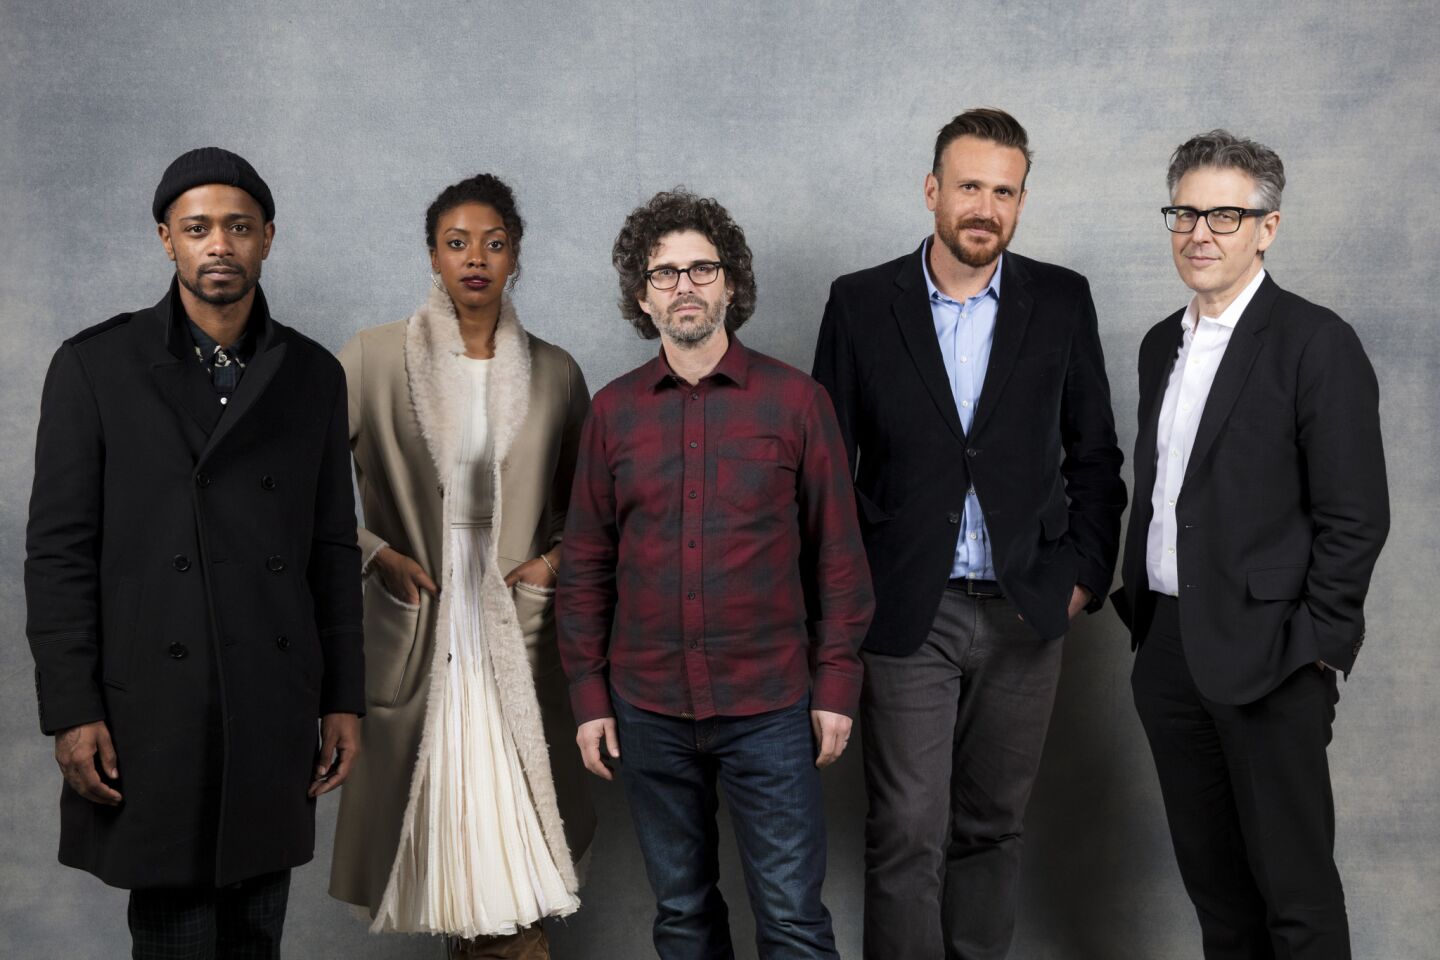 Actor Lakeith Stanfield, actress Condola Rashad, director Joshua Marston, actor Jason Segal and producer Ira Glass, from the film "Come Sunday."